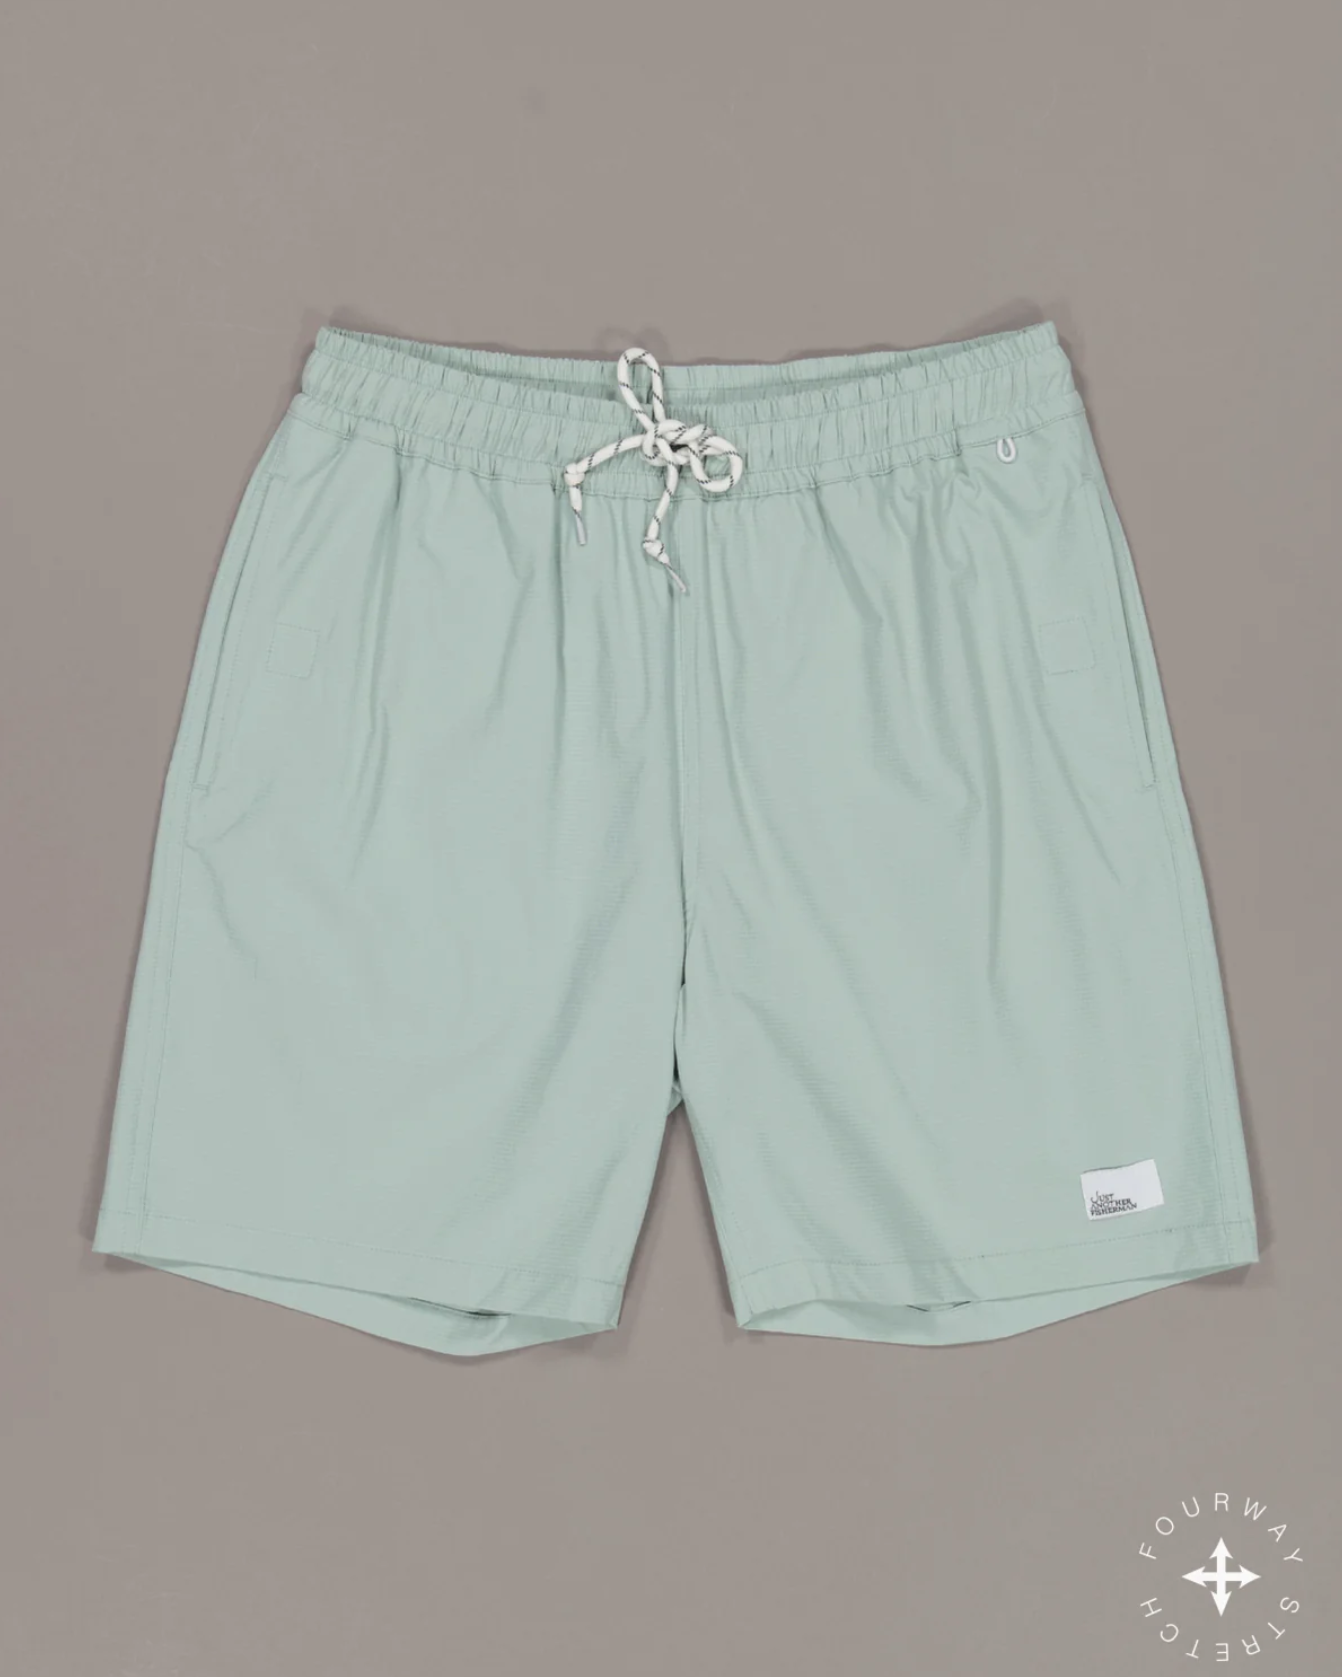 Just Another Fisherman Crewman Shorts - Blue Surf